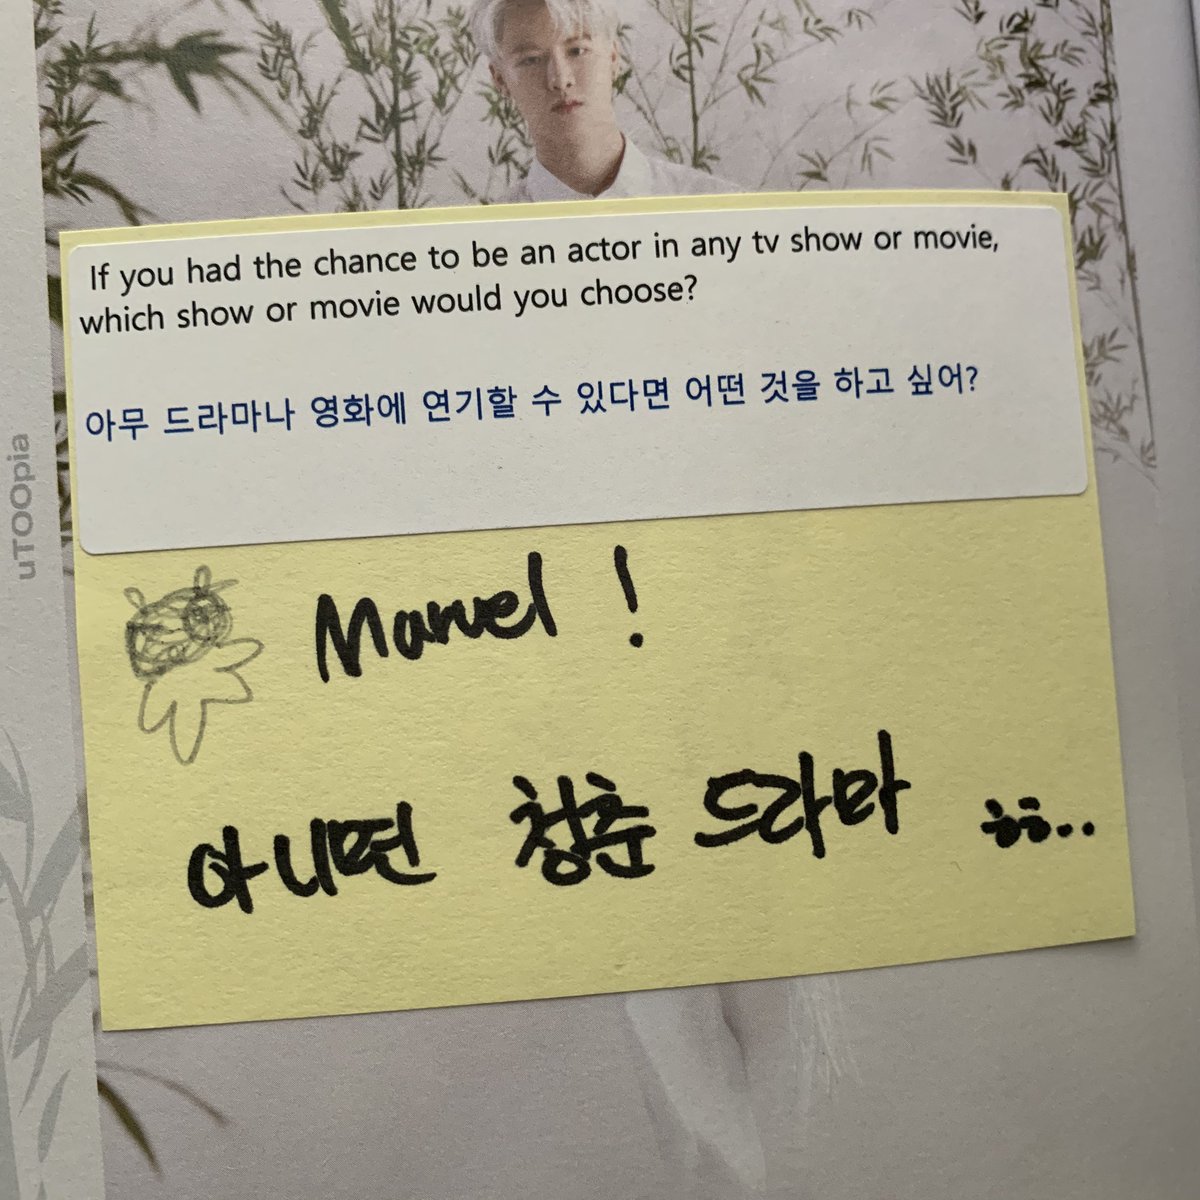 KYUNGHO ♡Q. if you had the chance to be an actor in any tv show or movie, which show or movie would you choose?A. marvel! or youth drama hehe